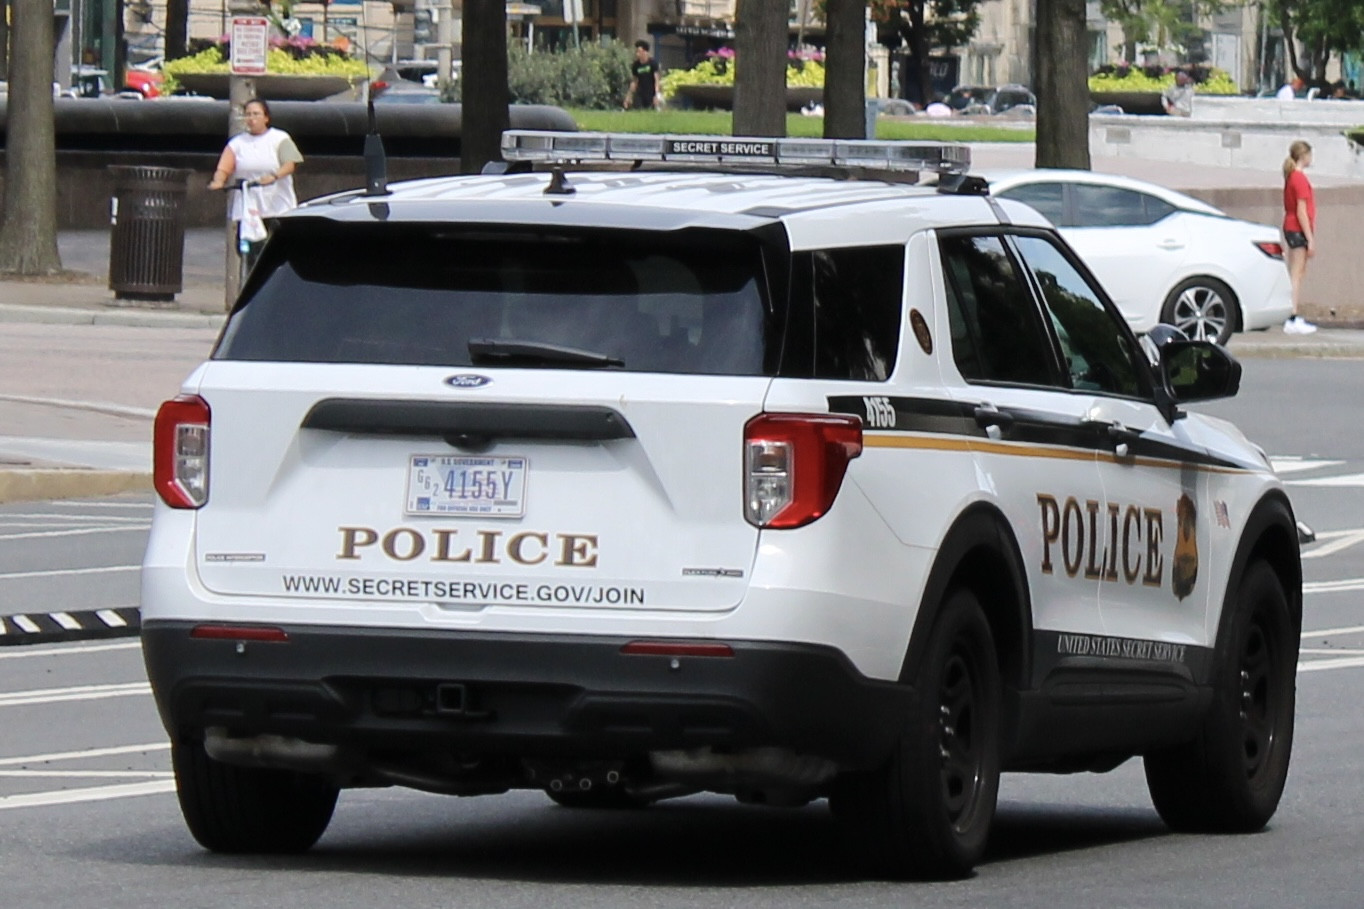 A photo  of United States Secret Service
            Cruiser 4155, a 2020-2022 Ford Police Interceptor Utility             taken by @riemergencyvehicles